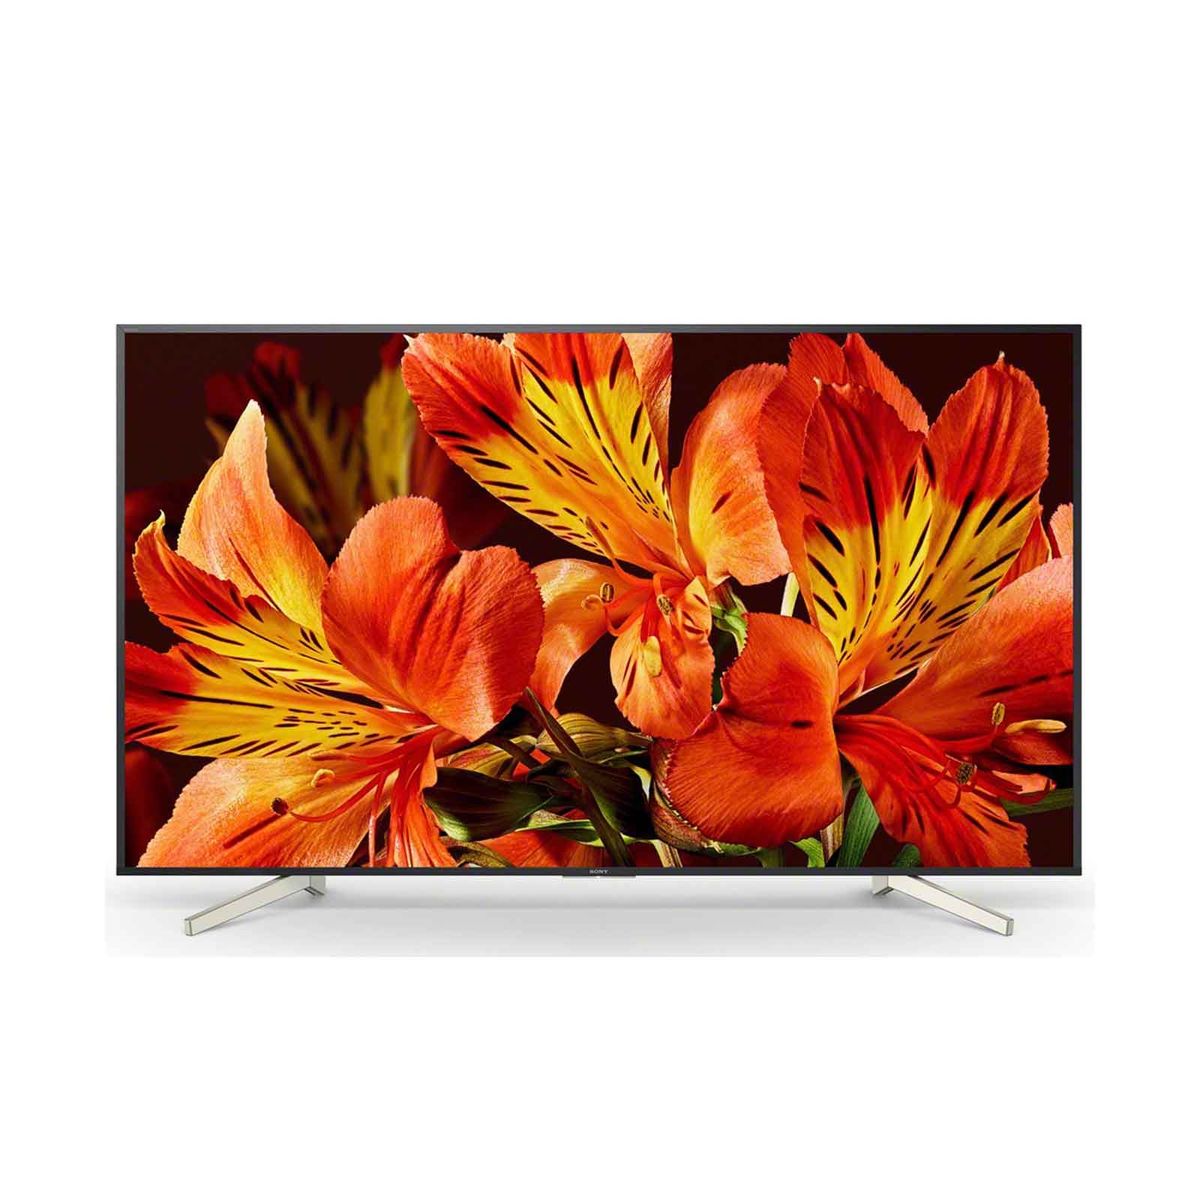 Sony 4K Ultra HD Android Smart LED TV KD49X8500F 49inch